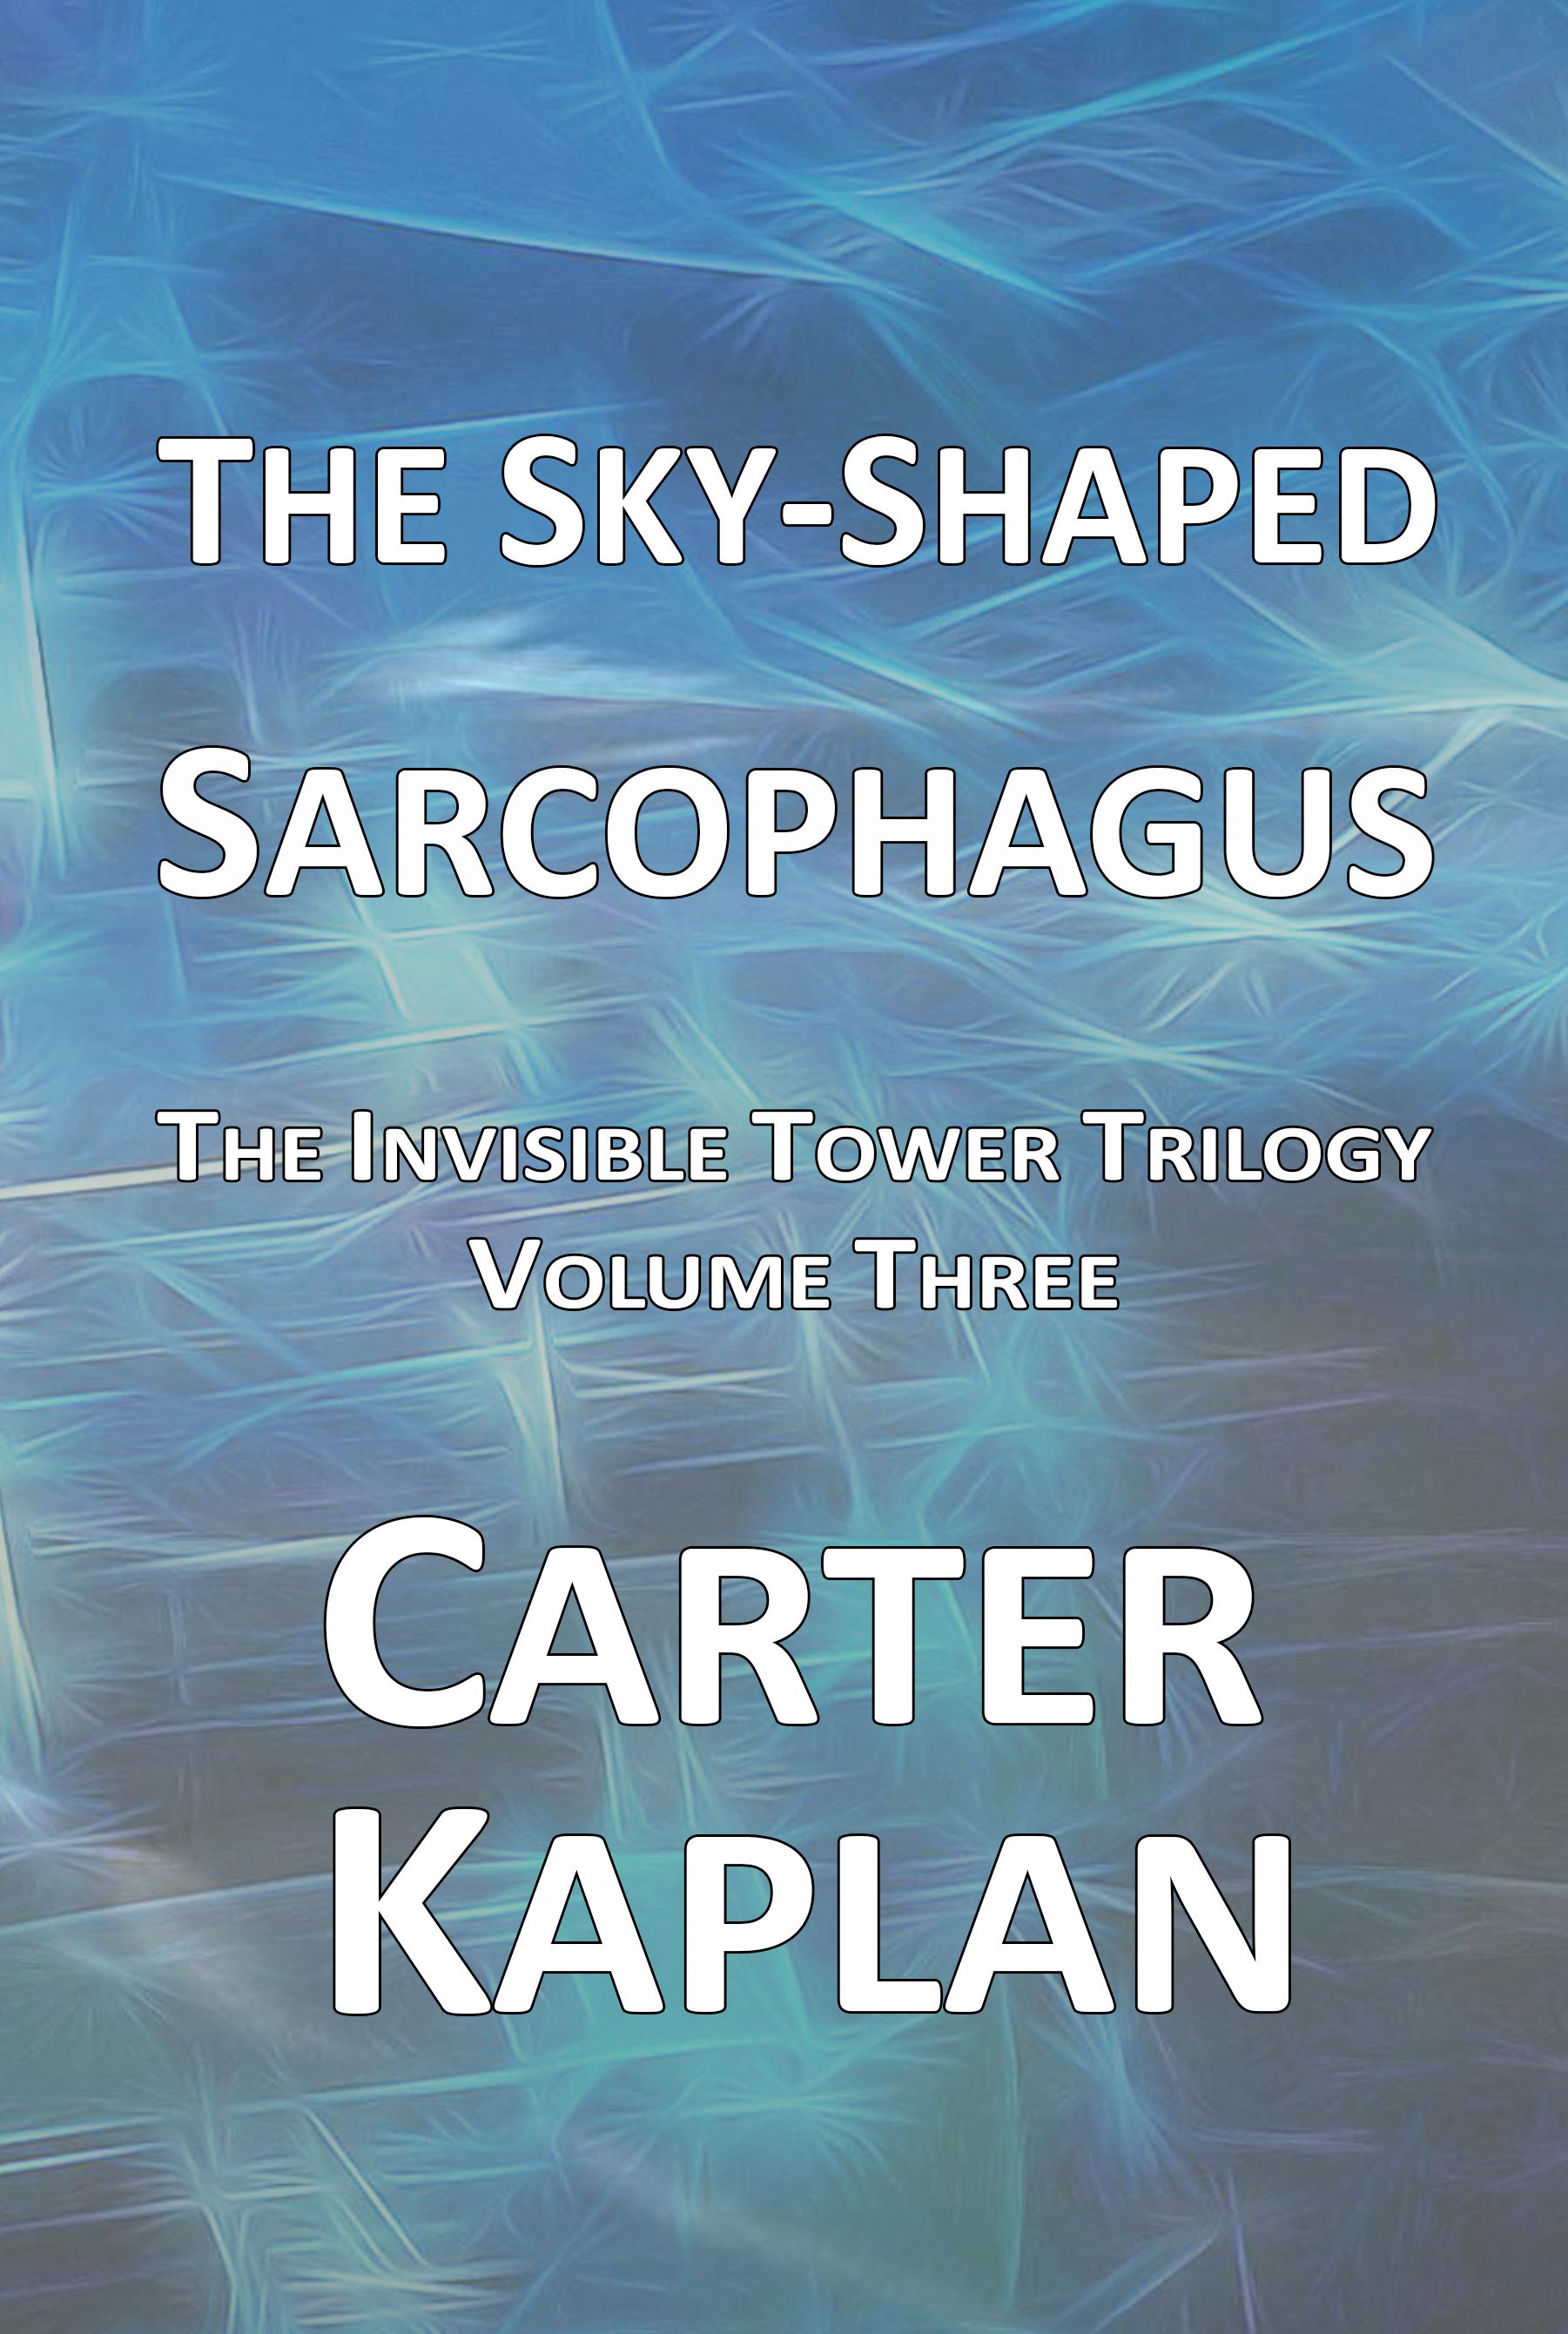 The Sky-Shaped Sarcophagus book cover